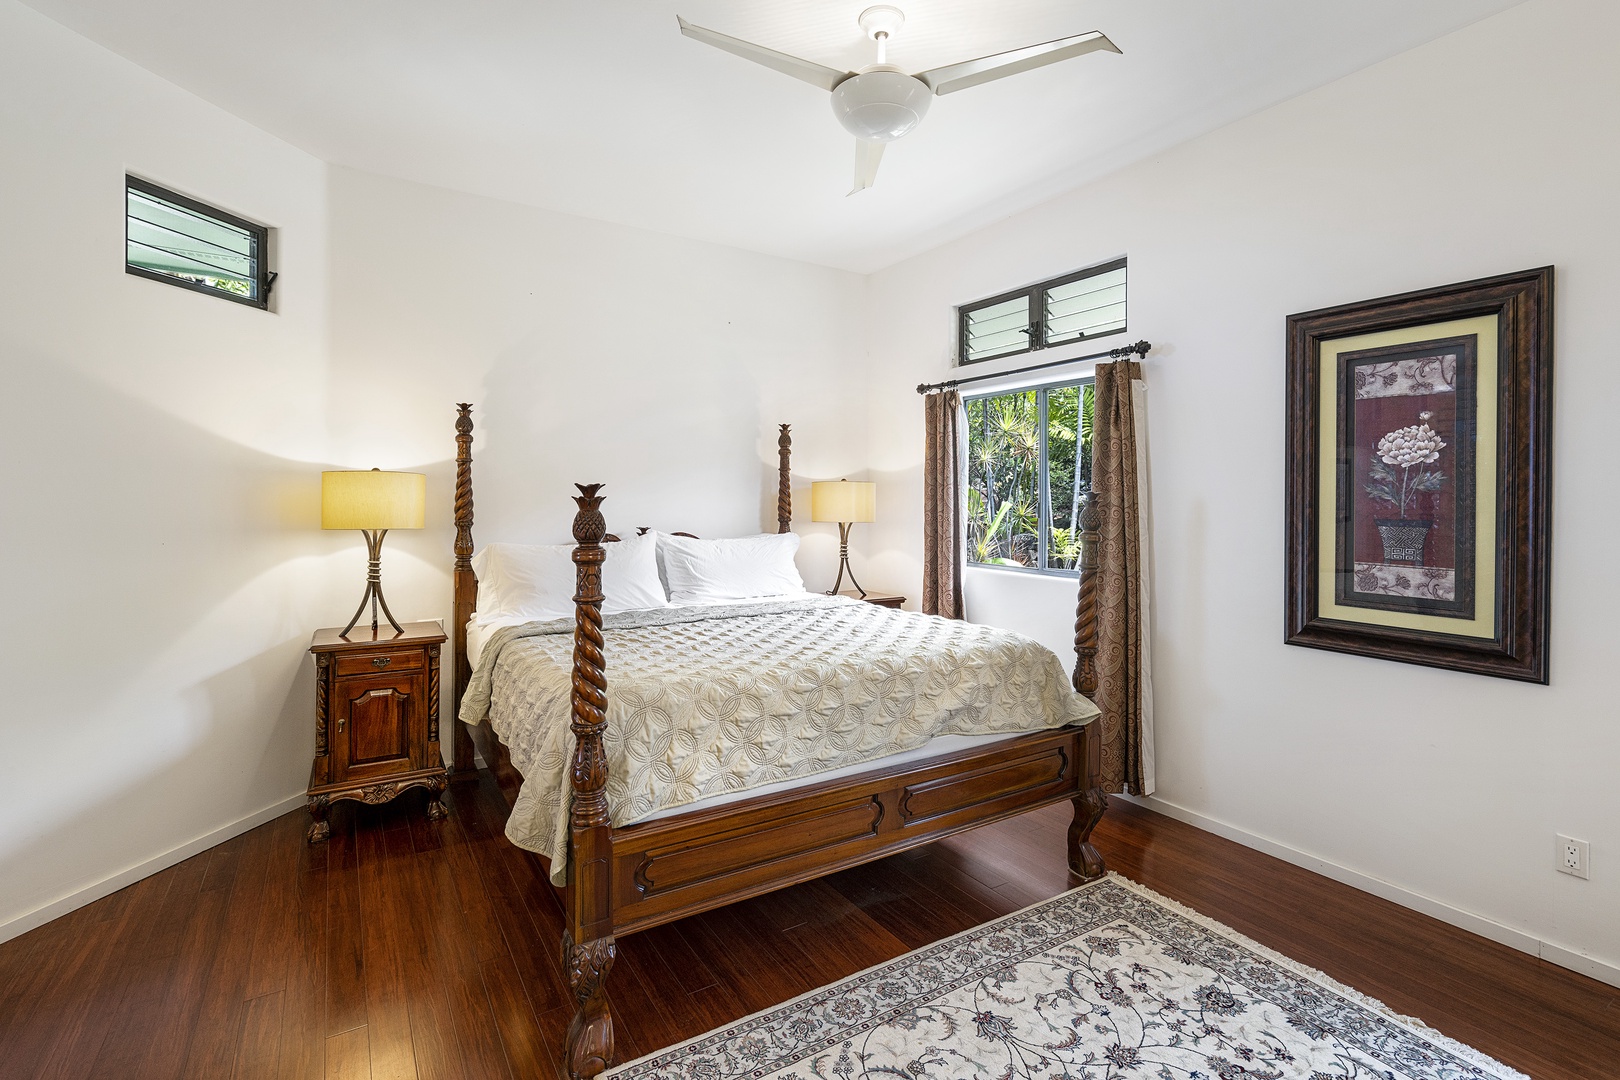 Kailua Kona Vacation Rentals, Ho'o Maluhia - Primary bedroom on the main floor equipped with Cal King bed!